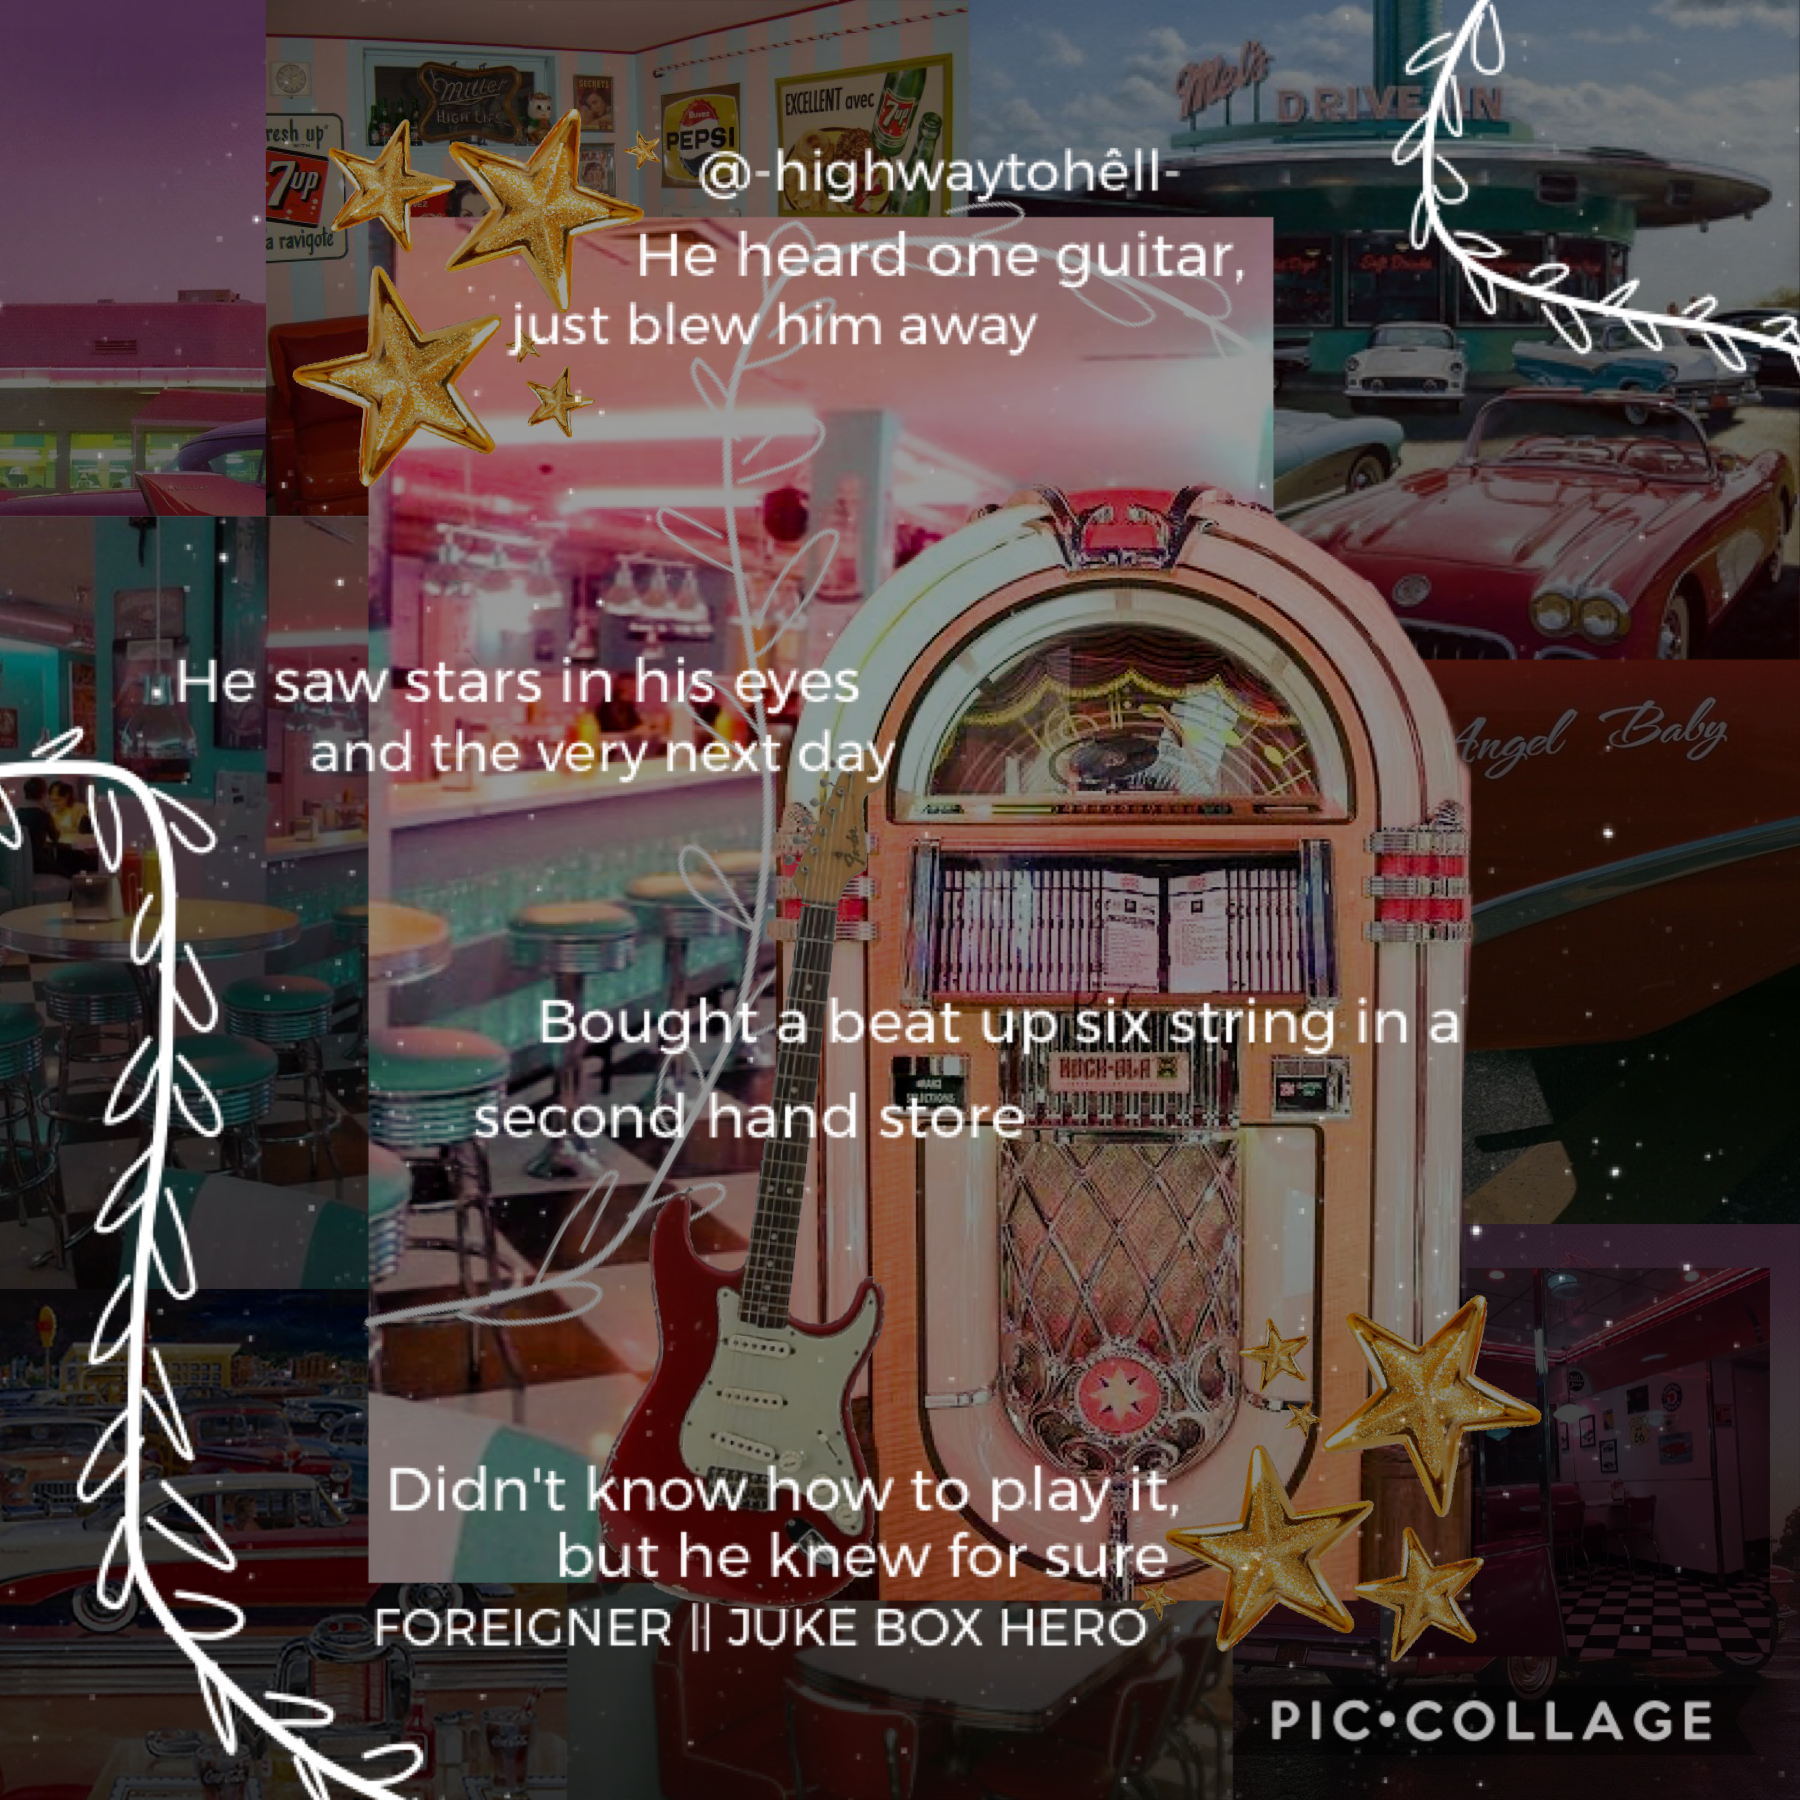 FOREIGNER || JUKE BOX HERO

so i wanna start doing something with my account other than just posting collages (i don't know if that even makes sense) so if you guys have anything you wanna see me do let me know cause i don't have any ideas right now.